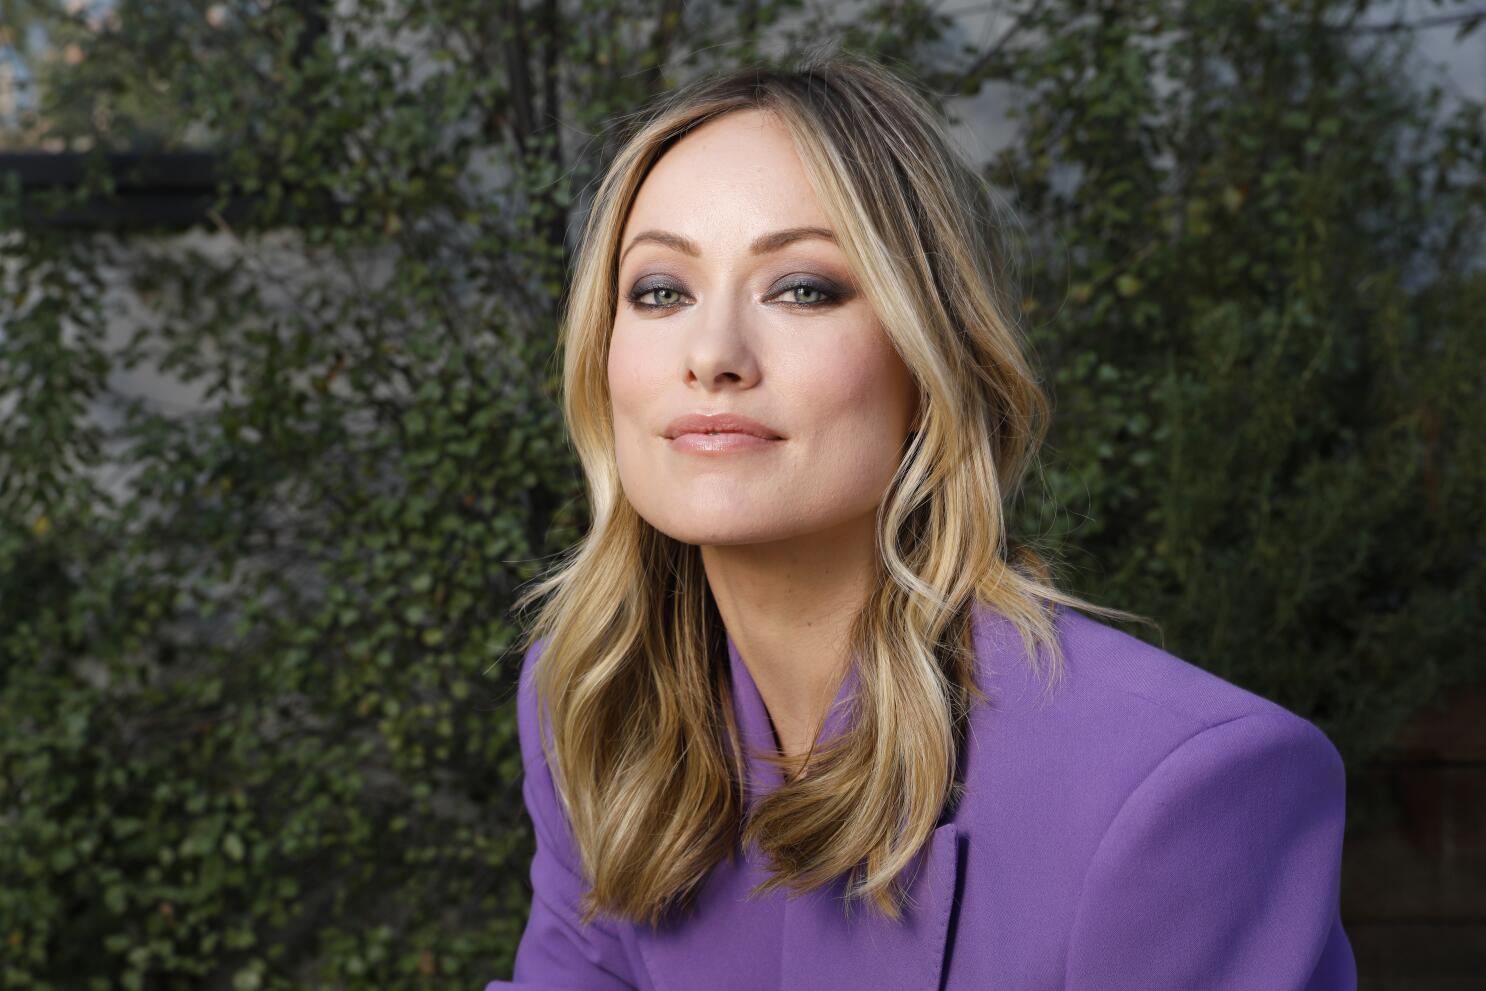 Things you might not know (but should!) about Olivia Wilde